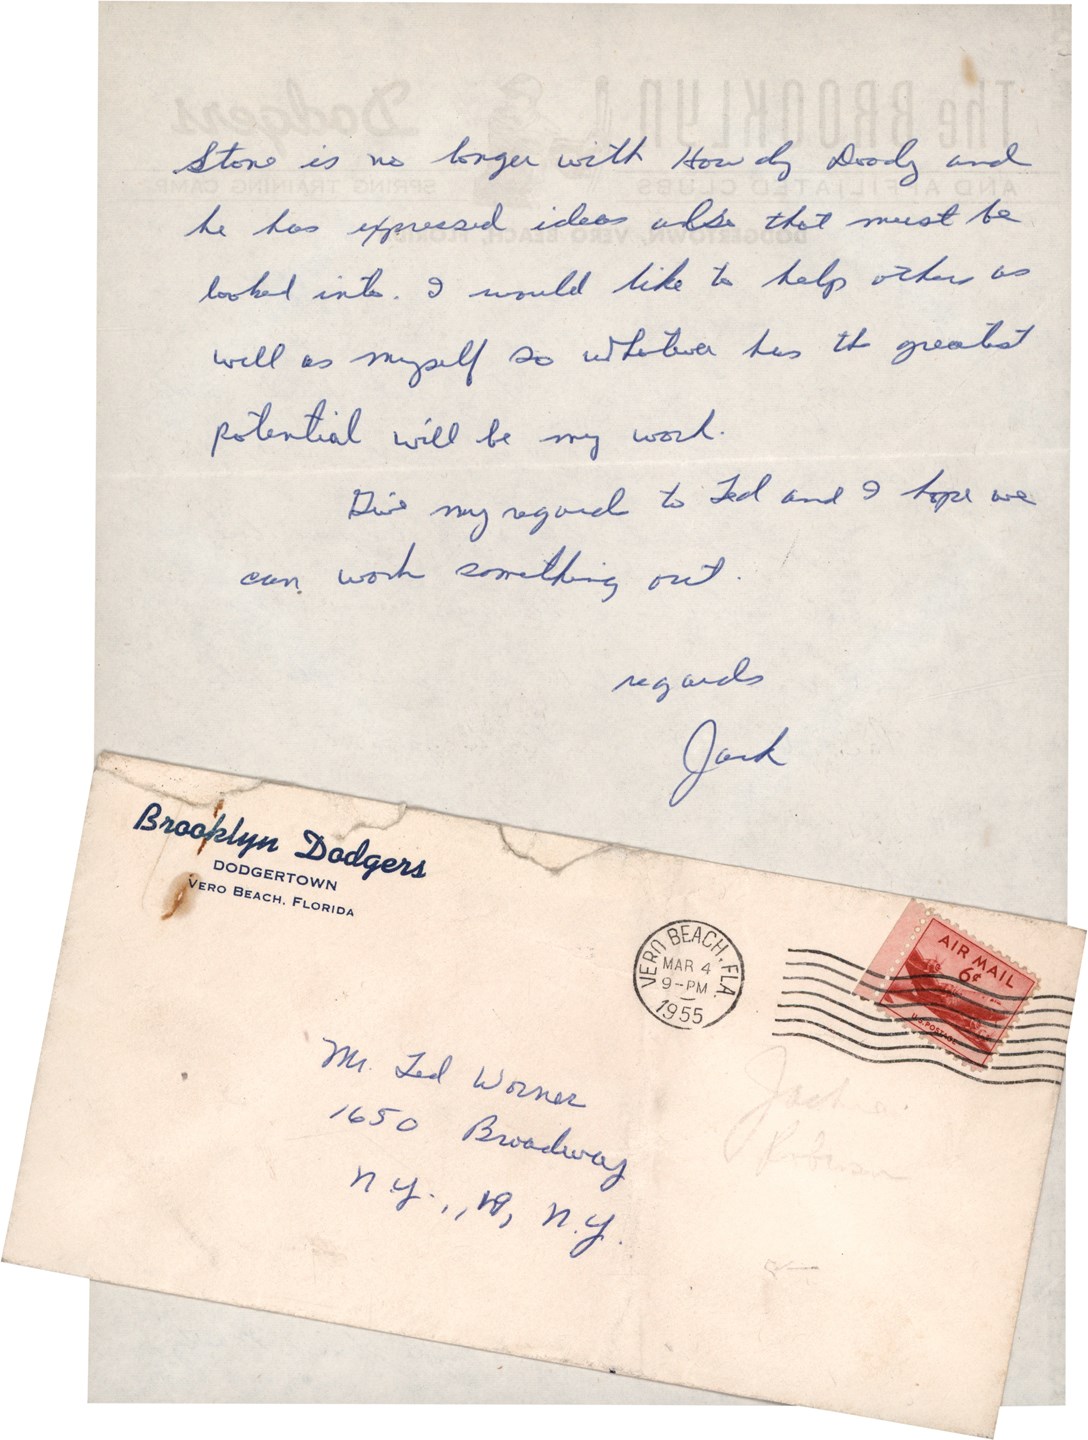 - 1955 Jackie Robinson Handwritten Letter - "I Would Like to Help Others as Well as Myself" (PSA)